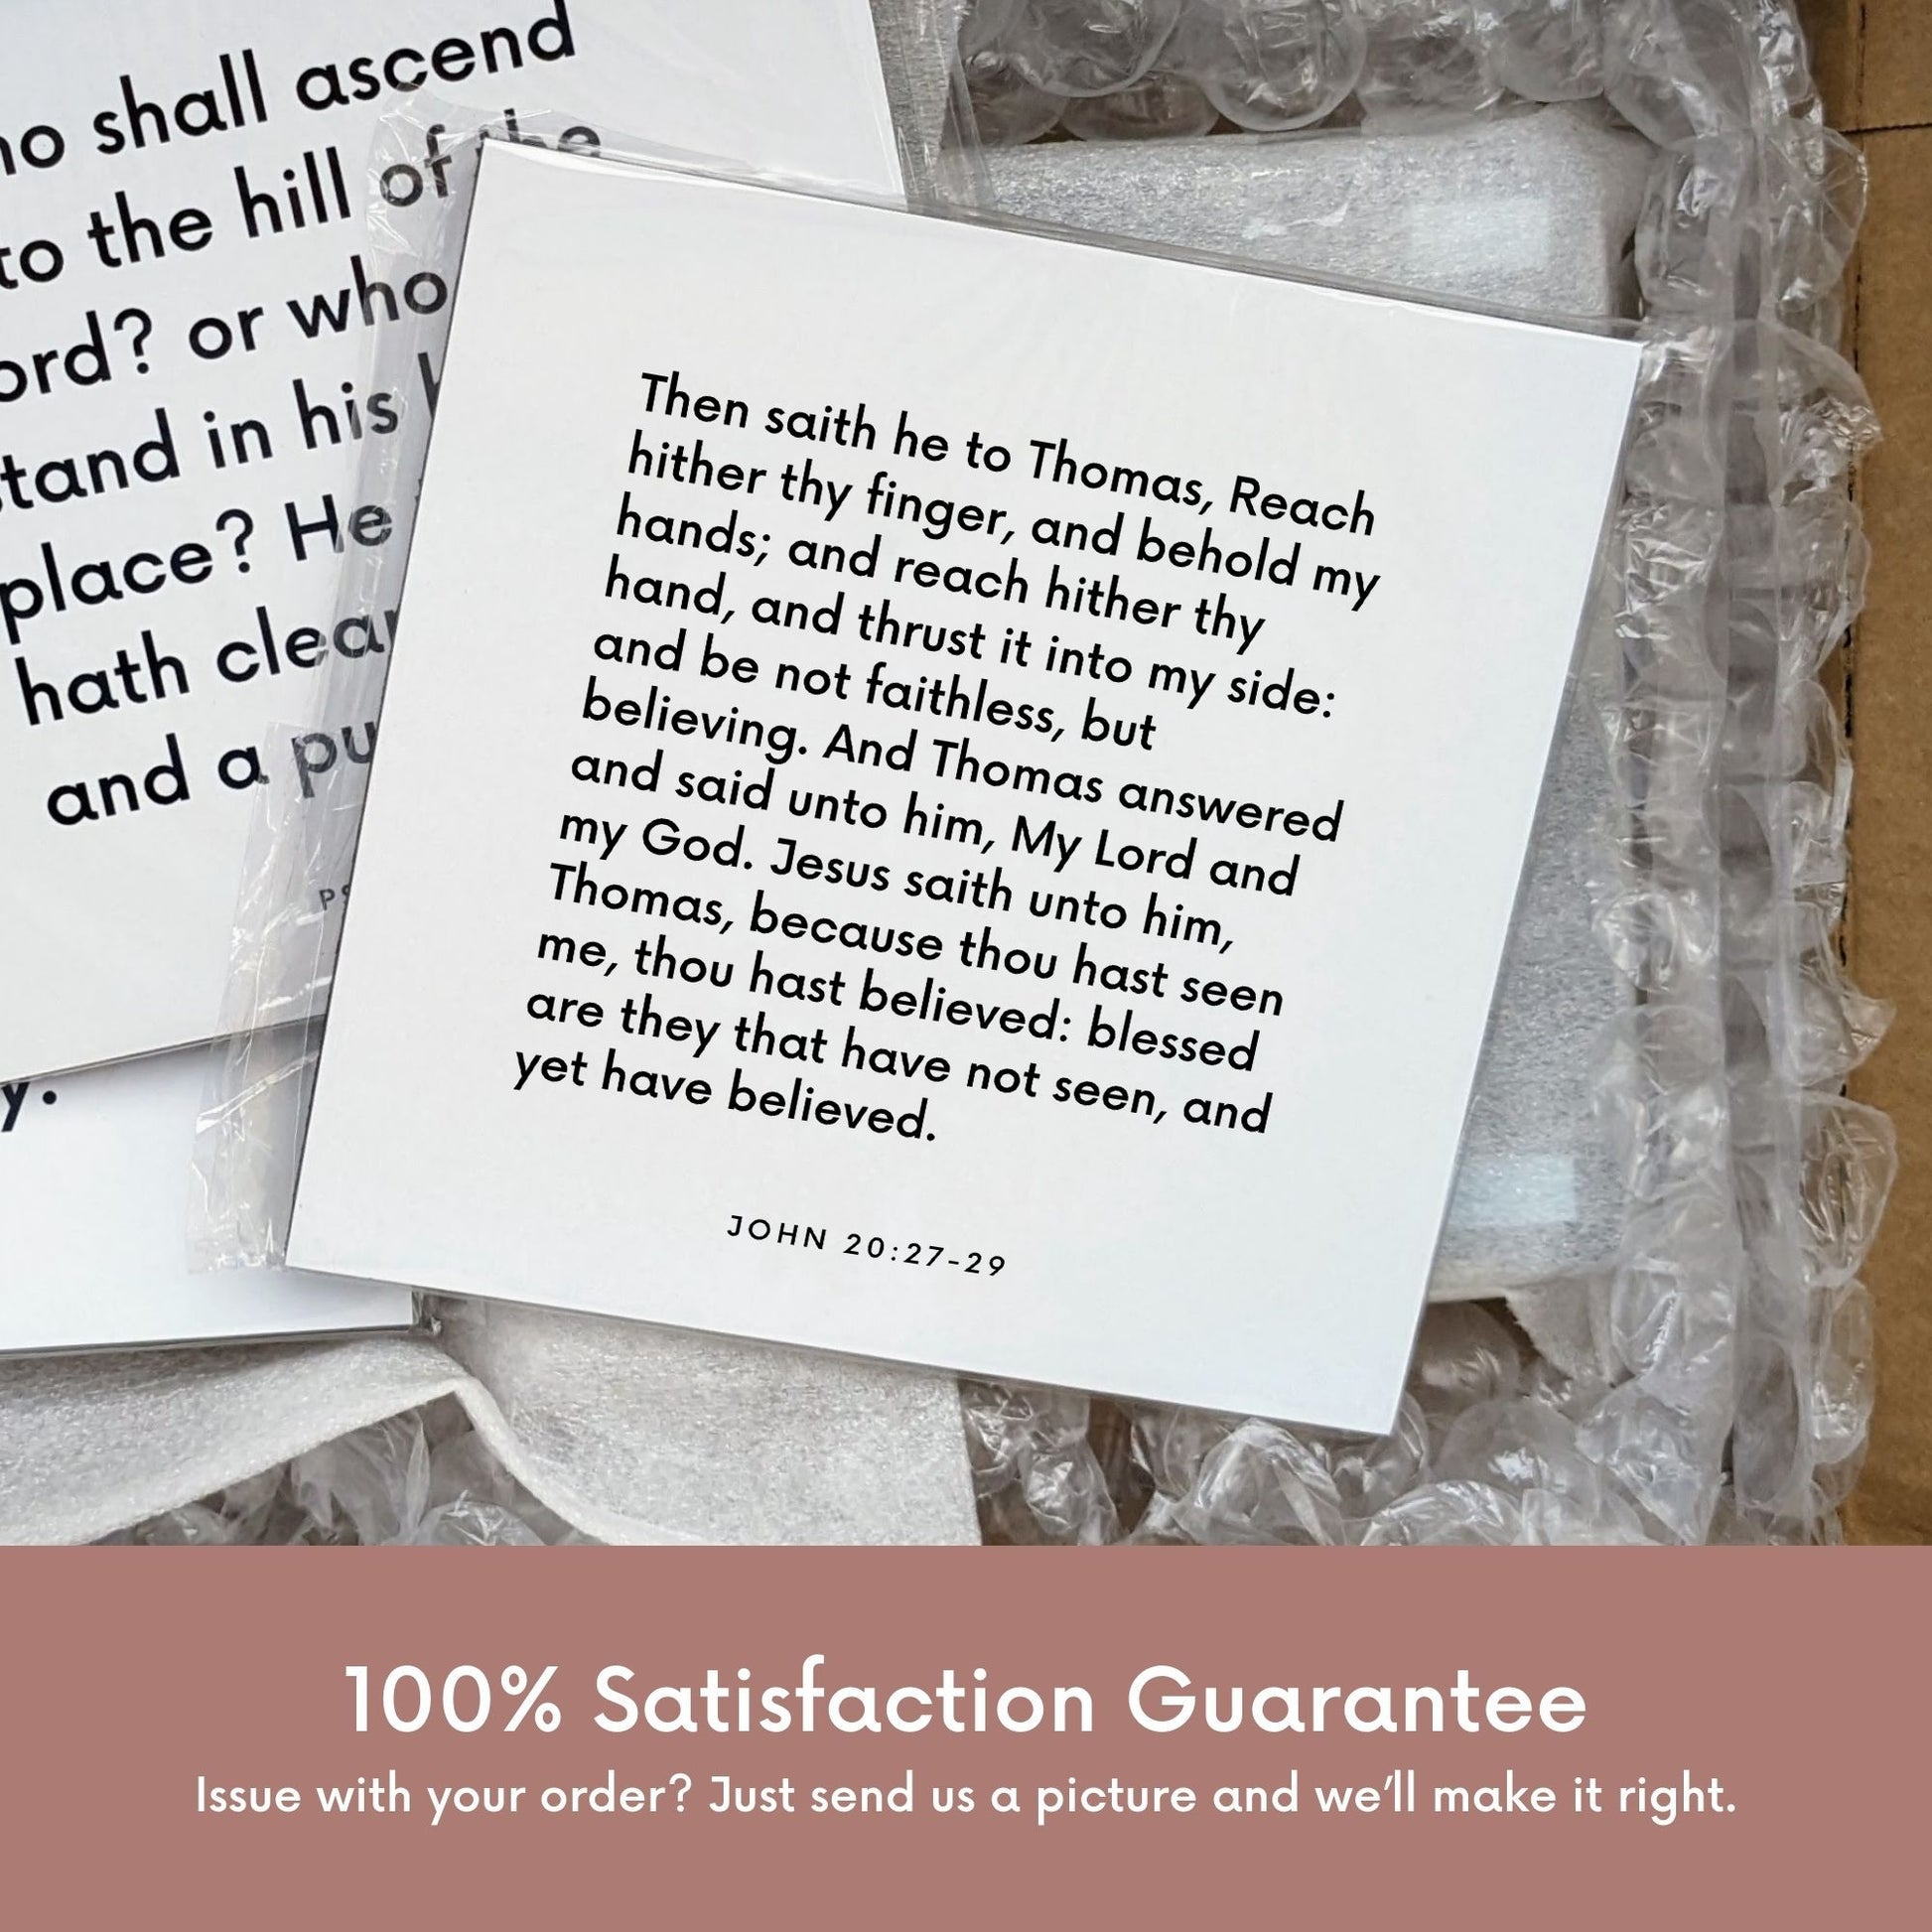 Shipping materials for scripture tile of John 20:27-29 - "Be not faithless, but believing"